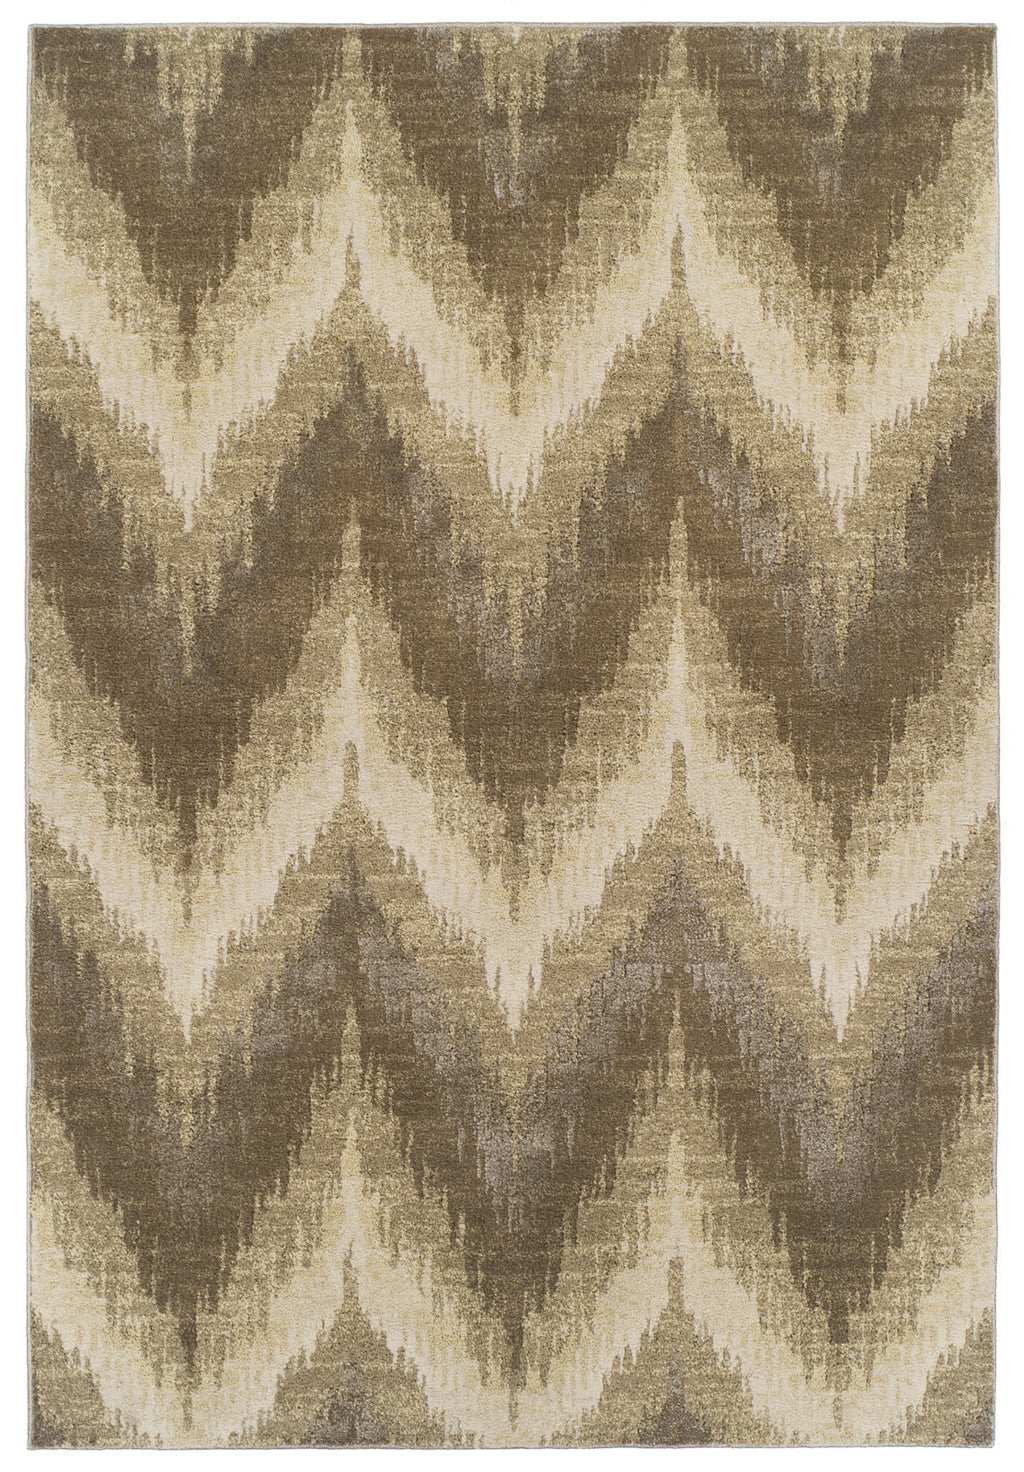 KAS Home Timeless 8006 Champagne Chevron Machine Woven Area Rug by Donny Osmond